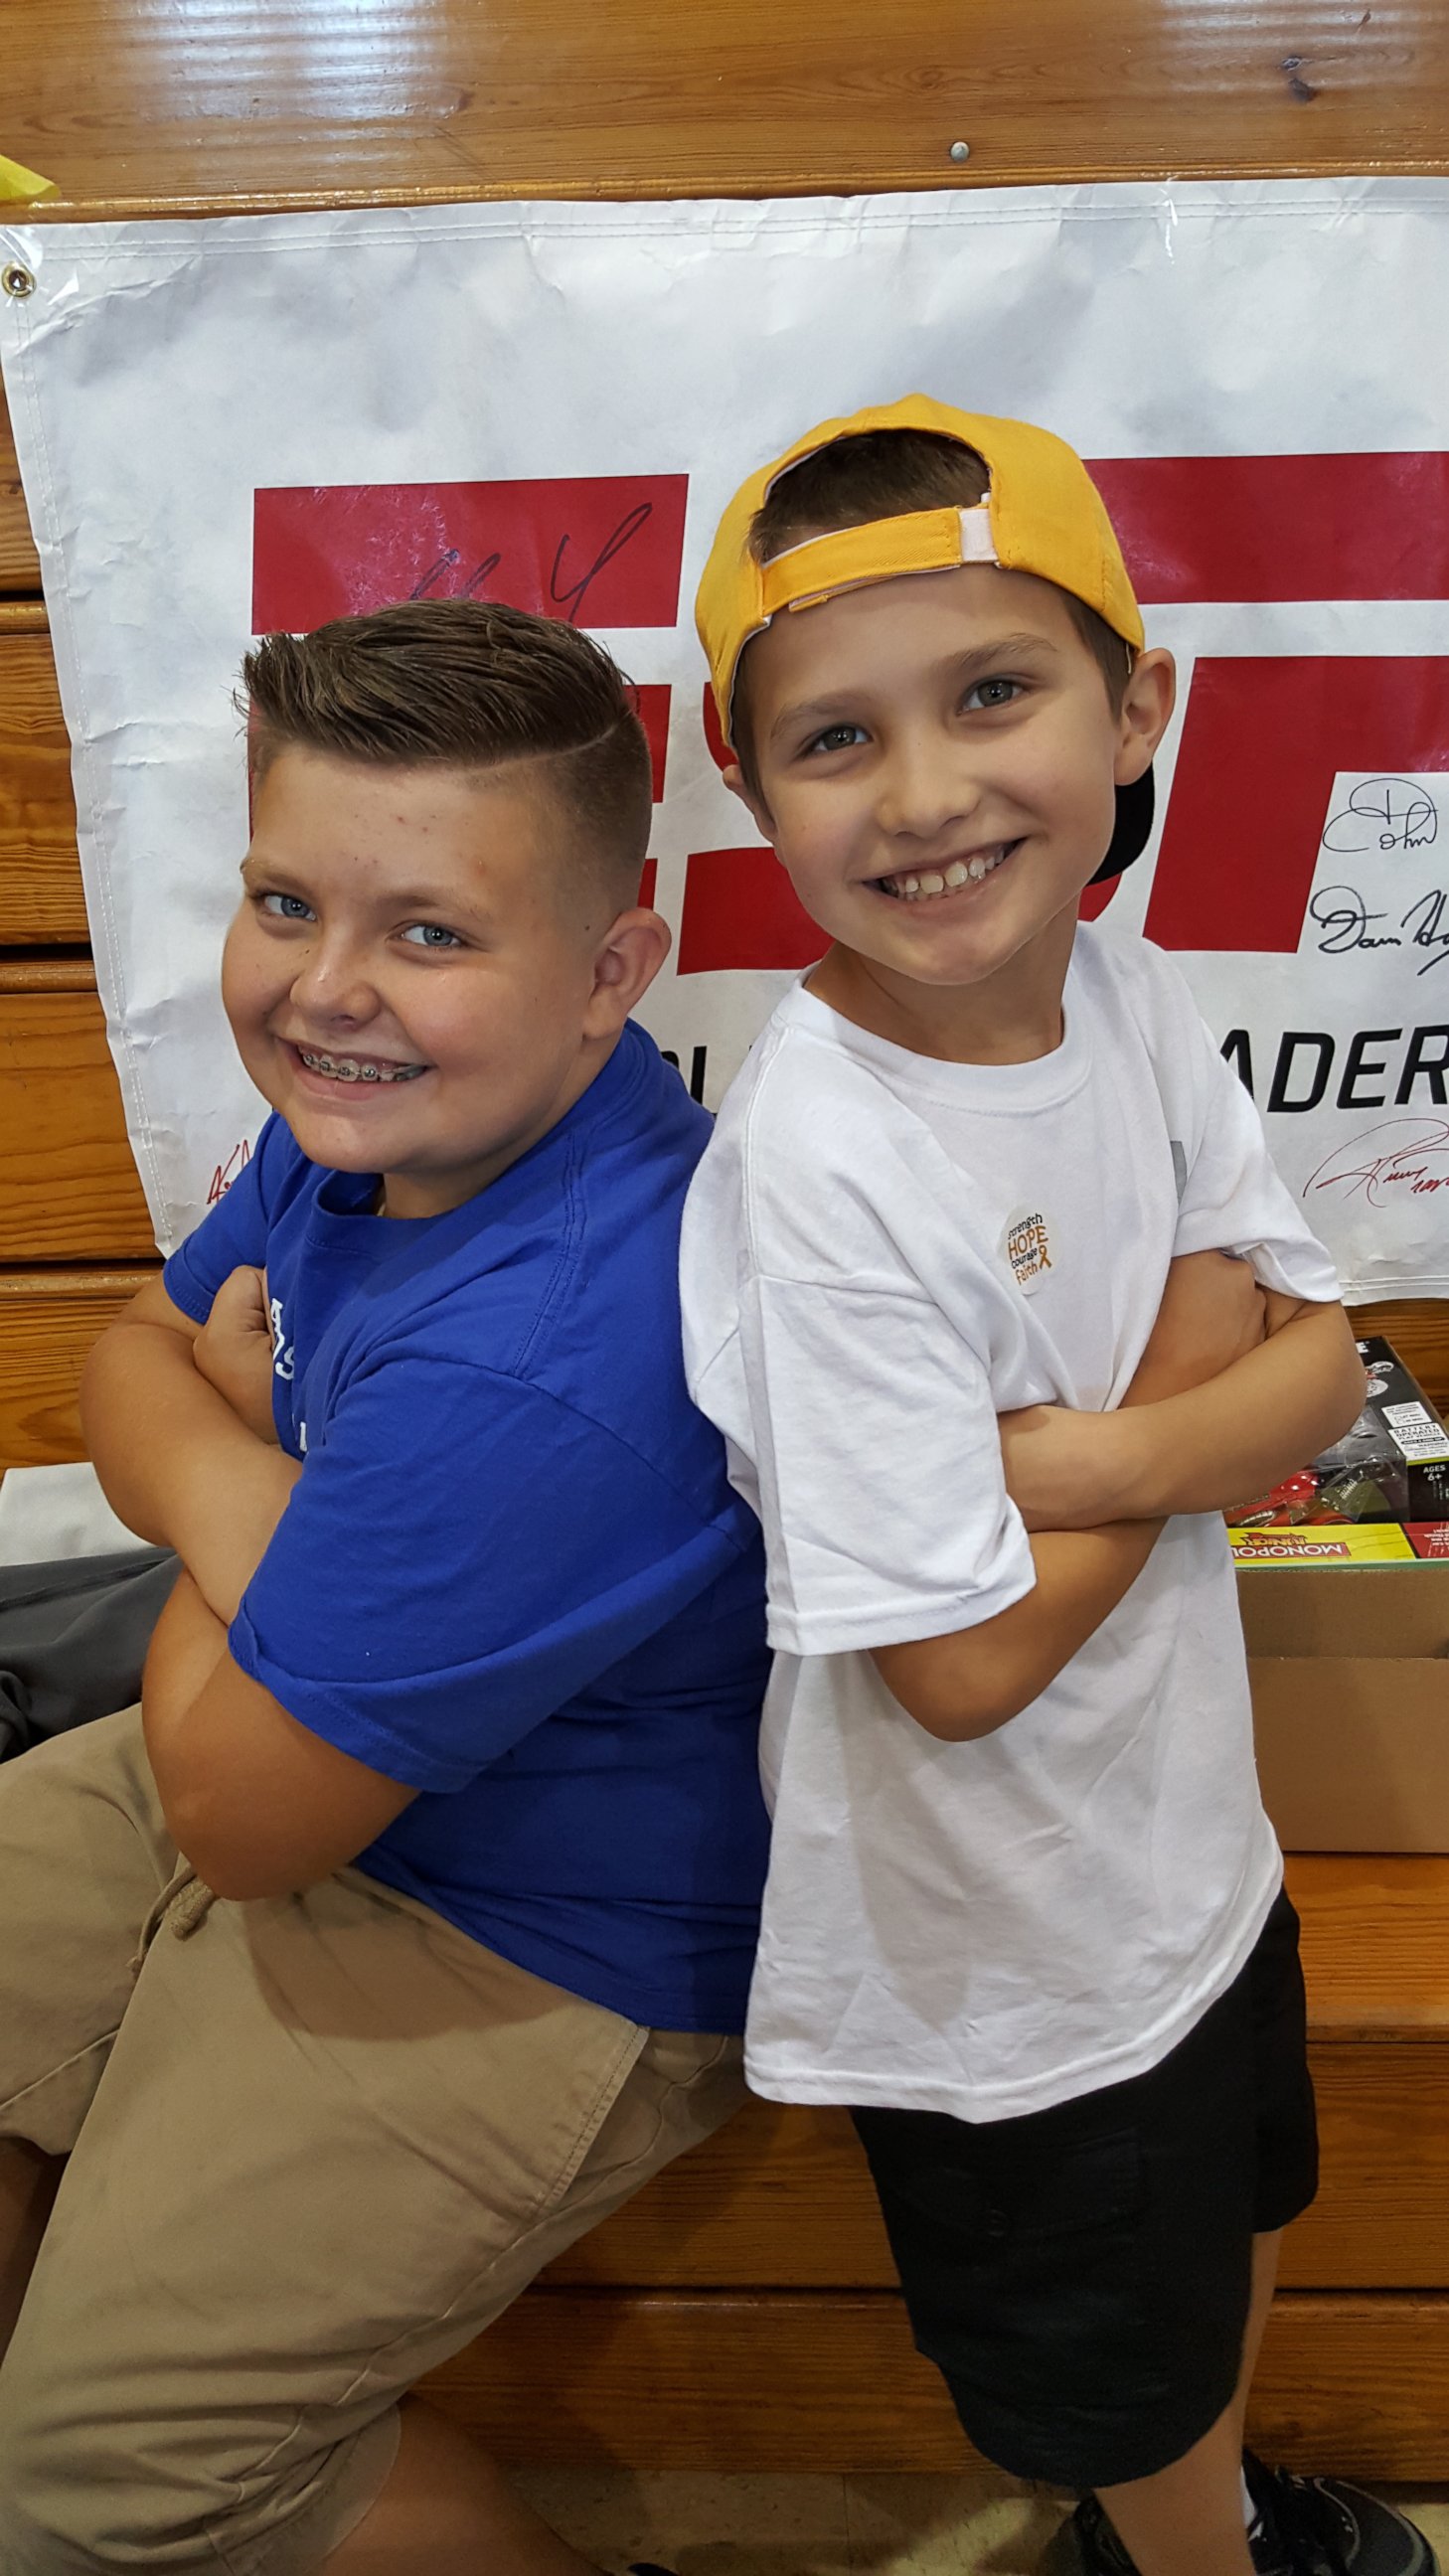 PHOTO: Seen in an undated photo, Brady Kahle, 10, and his friend Landen Palatino, 9, who was diagnosed with a grade 4 brain tumor on Jan. 8, 2016